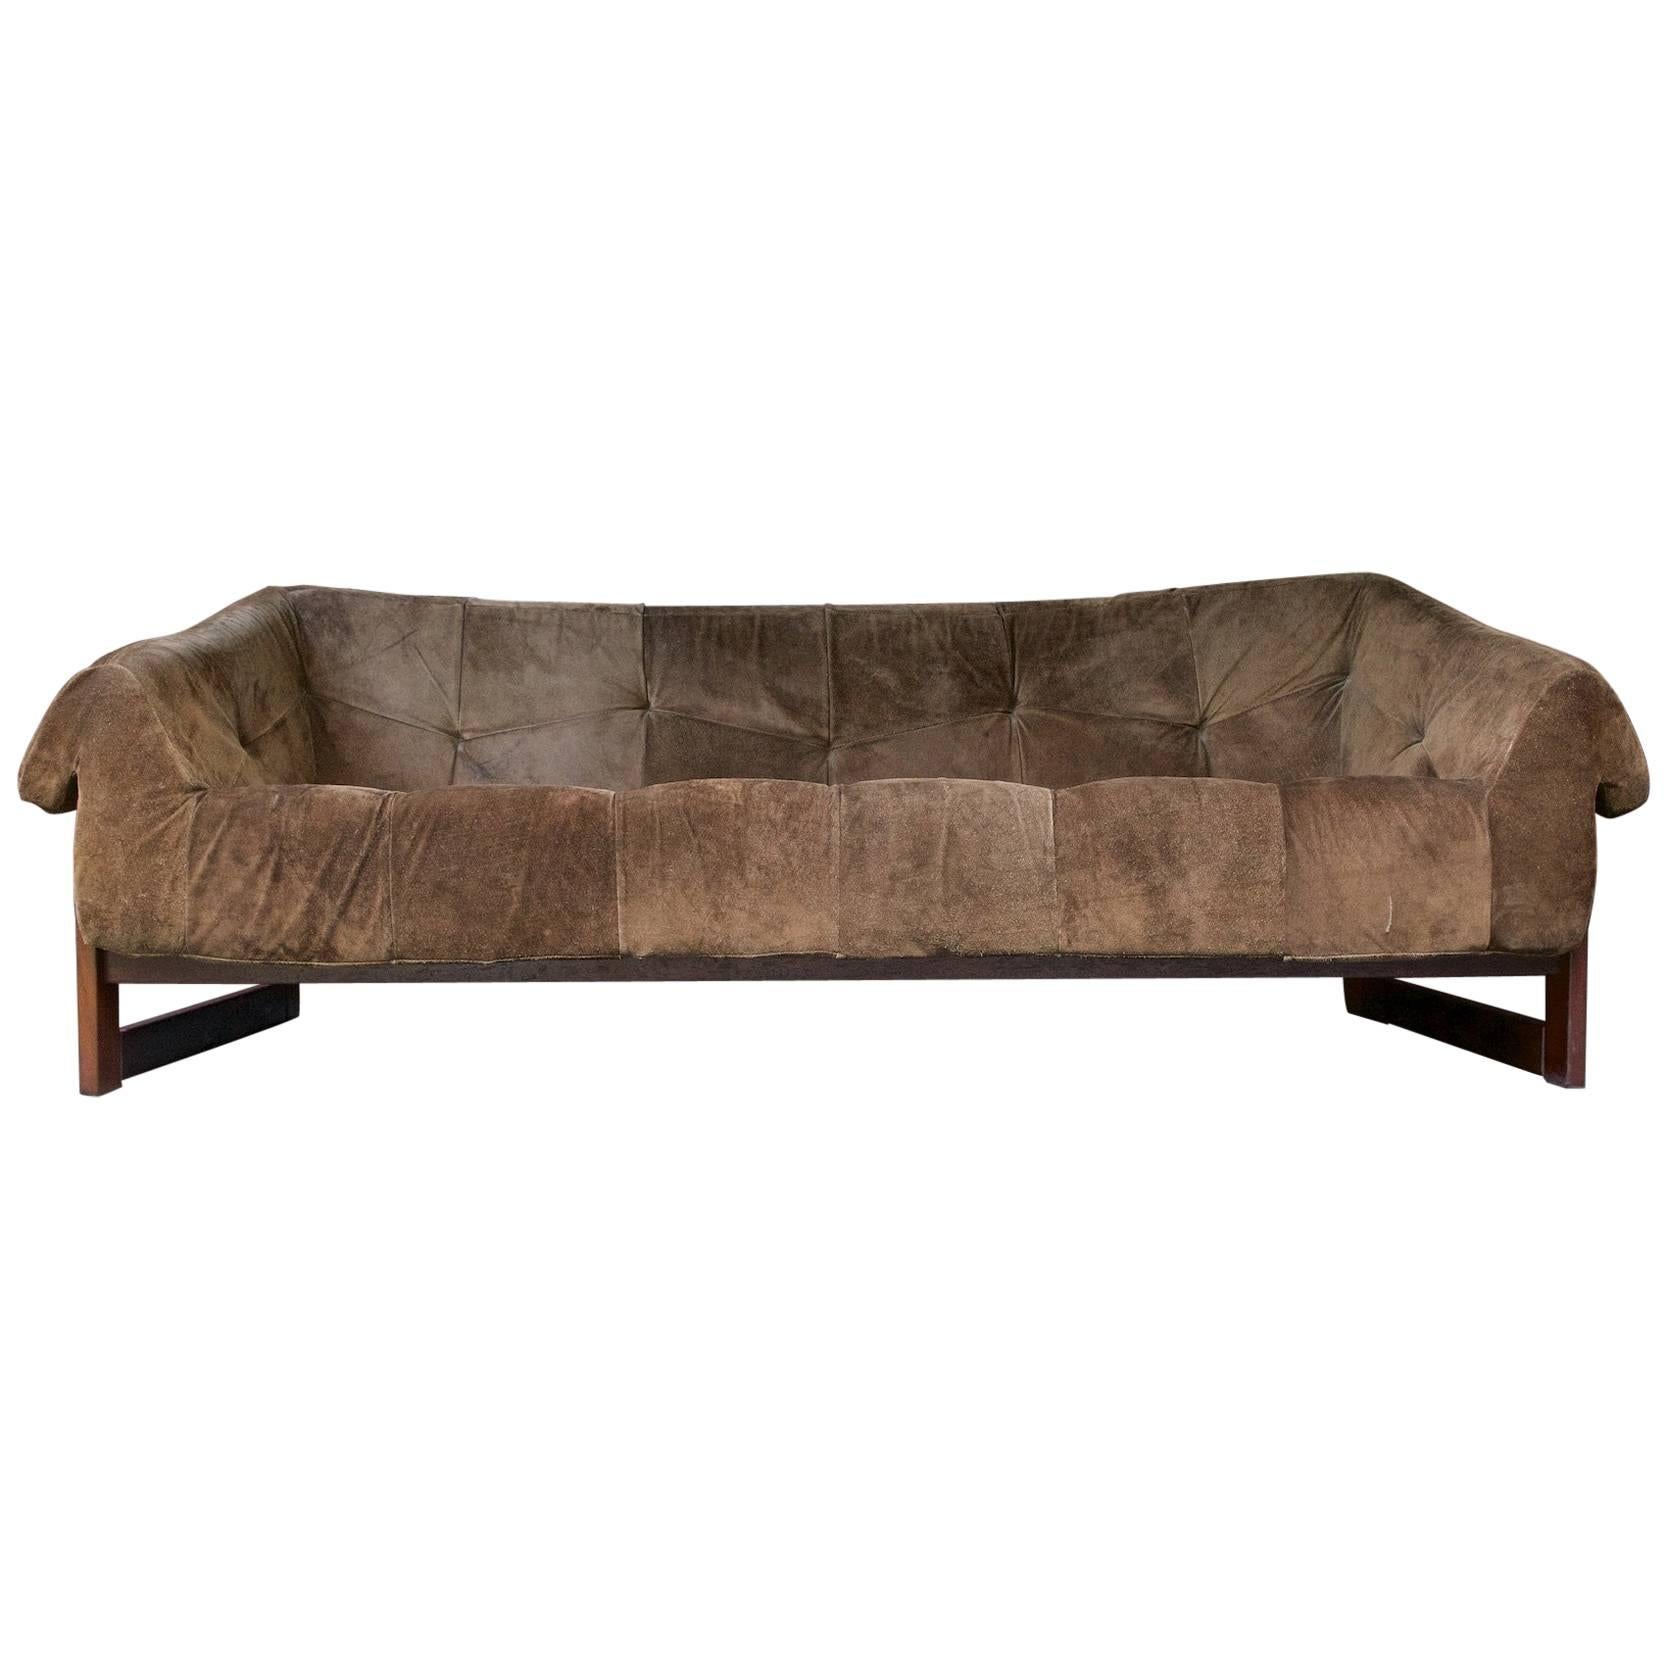 1960s Vintage Percival Lafer Brown Suede Leather Jungle Sling Sofa Midcentury